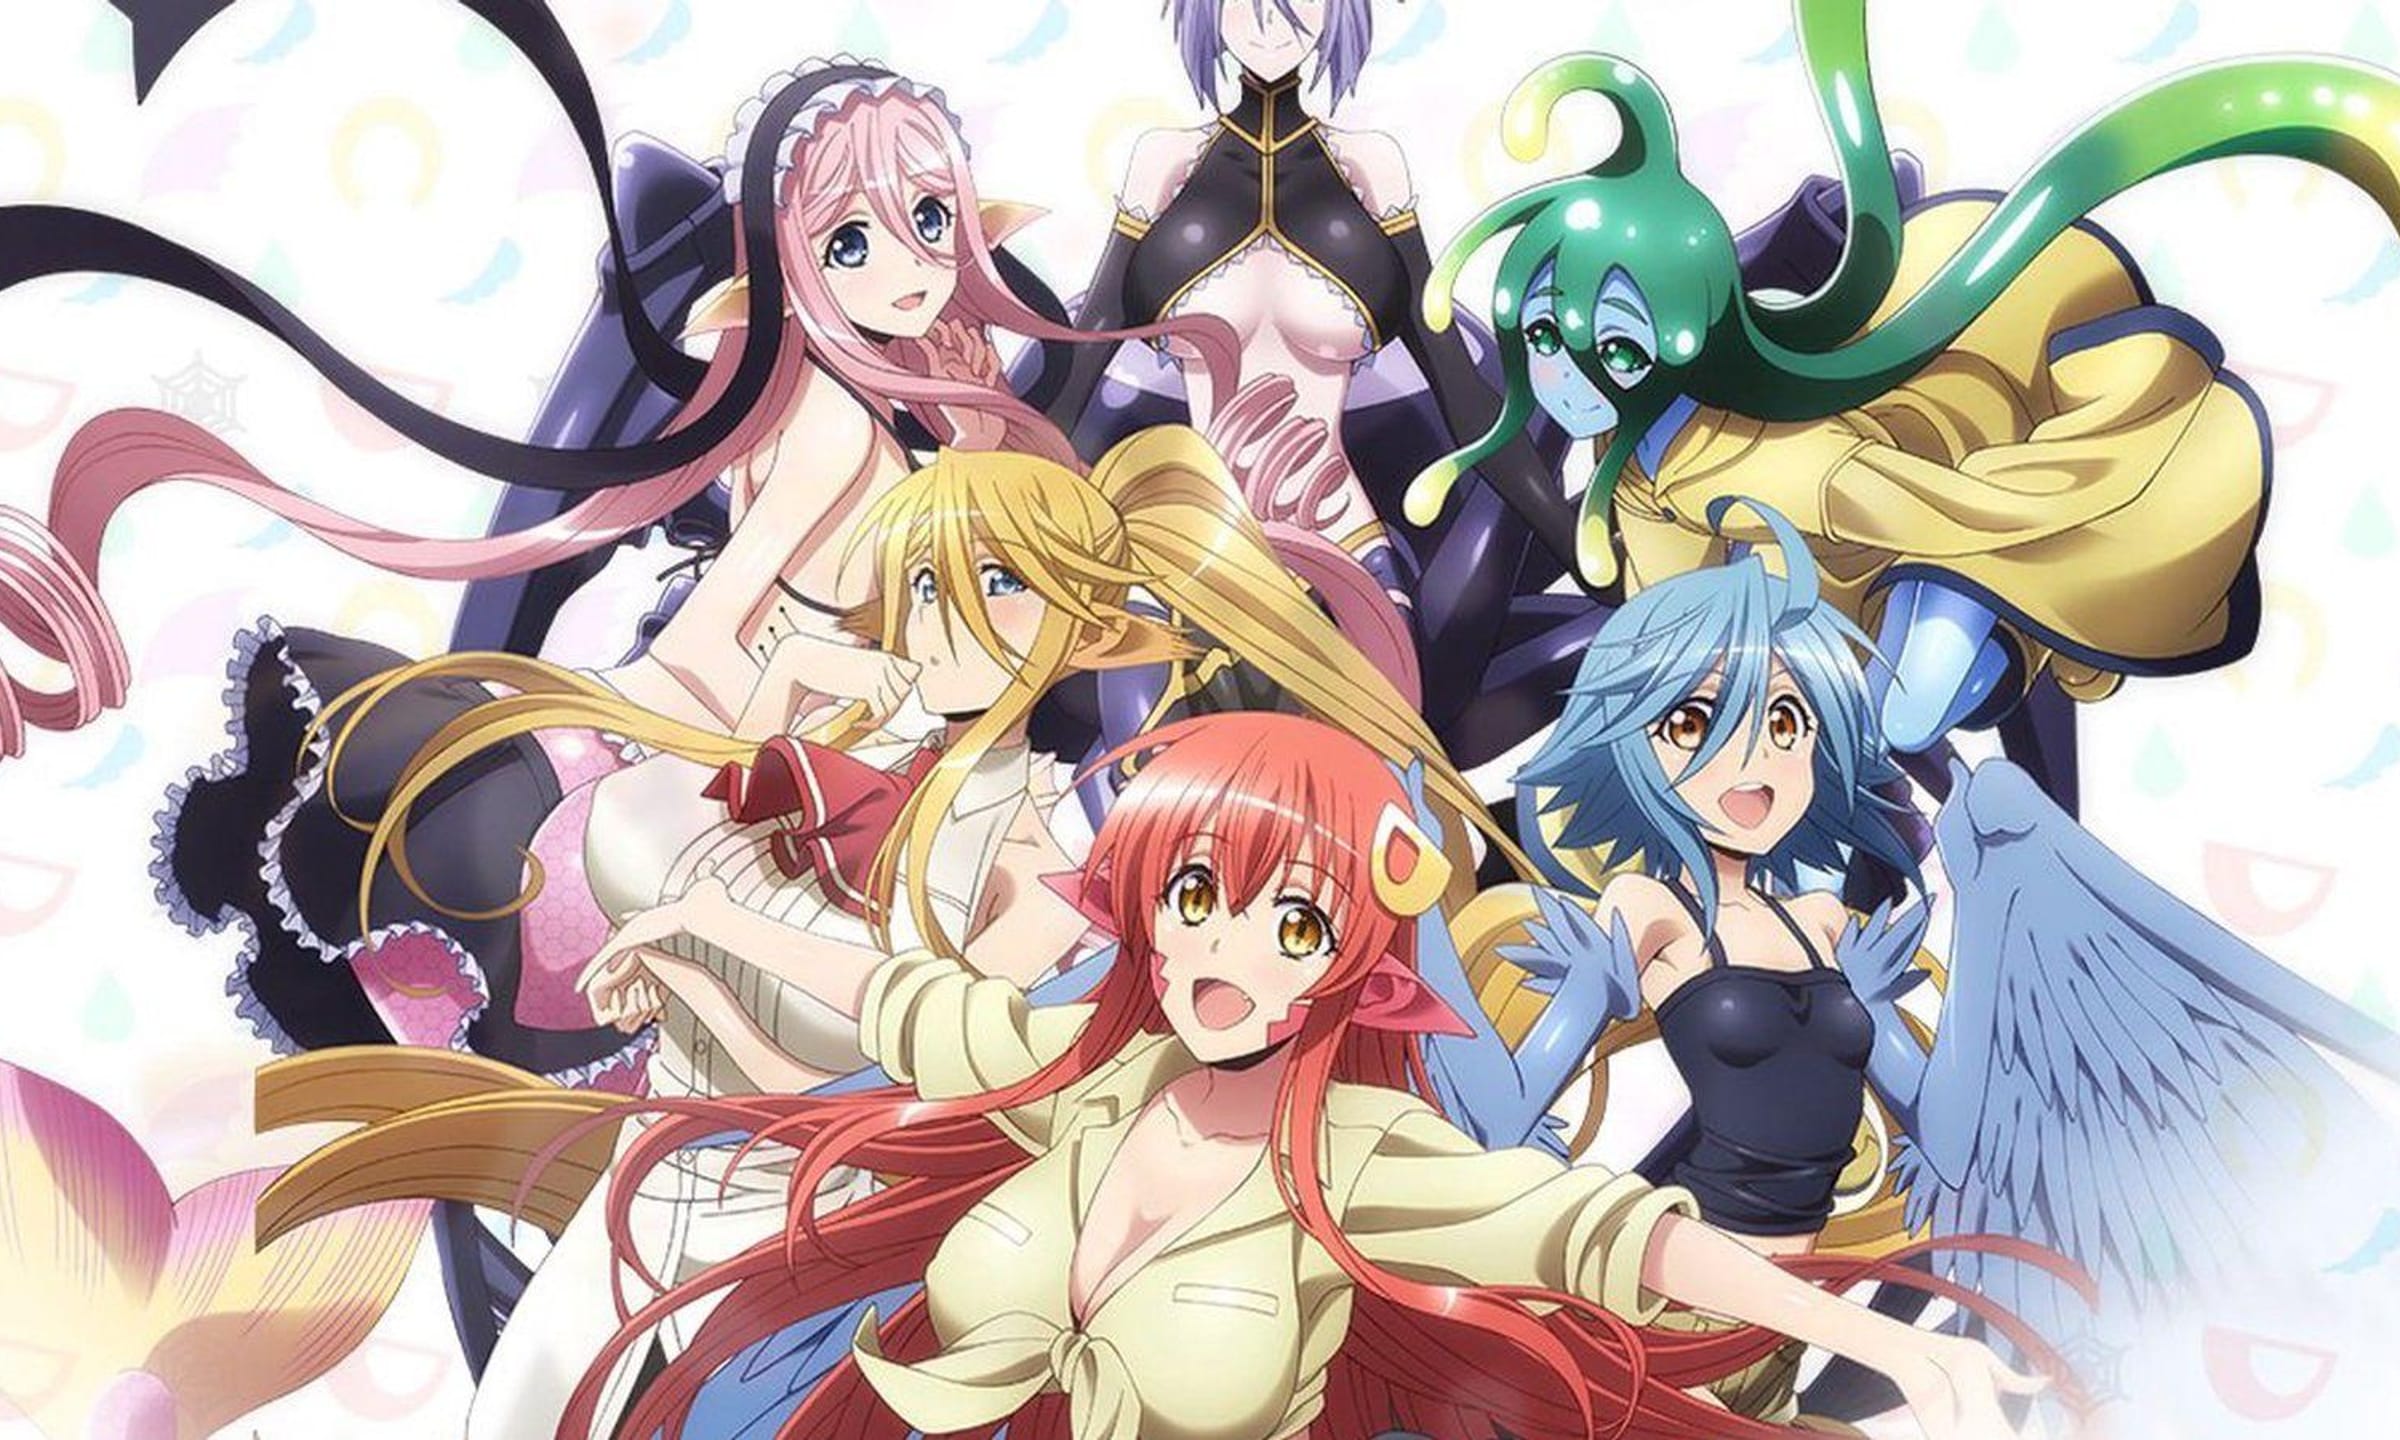 alicia aleman recommends Monster Girl Quest Ova